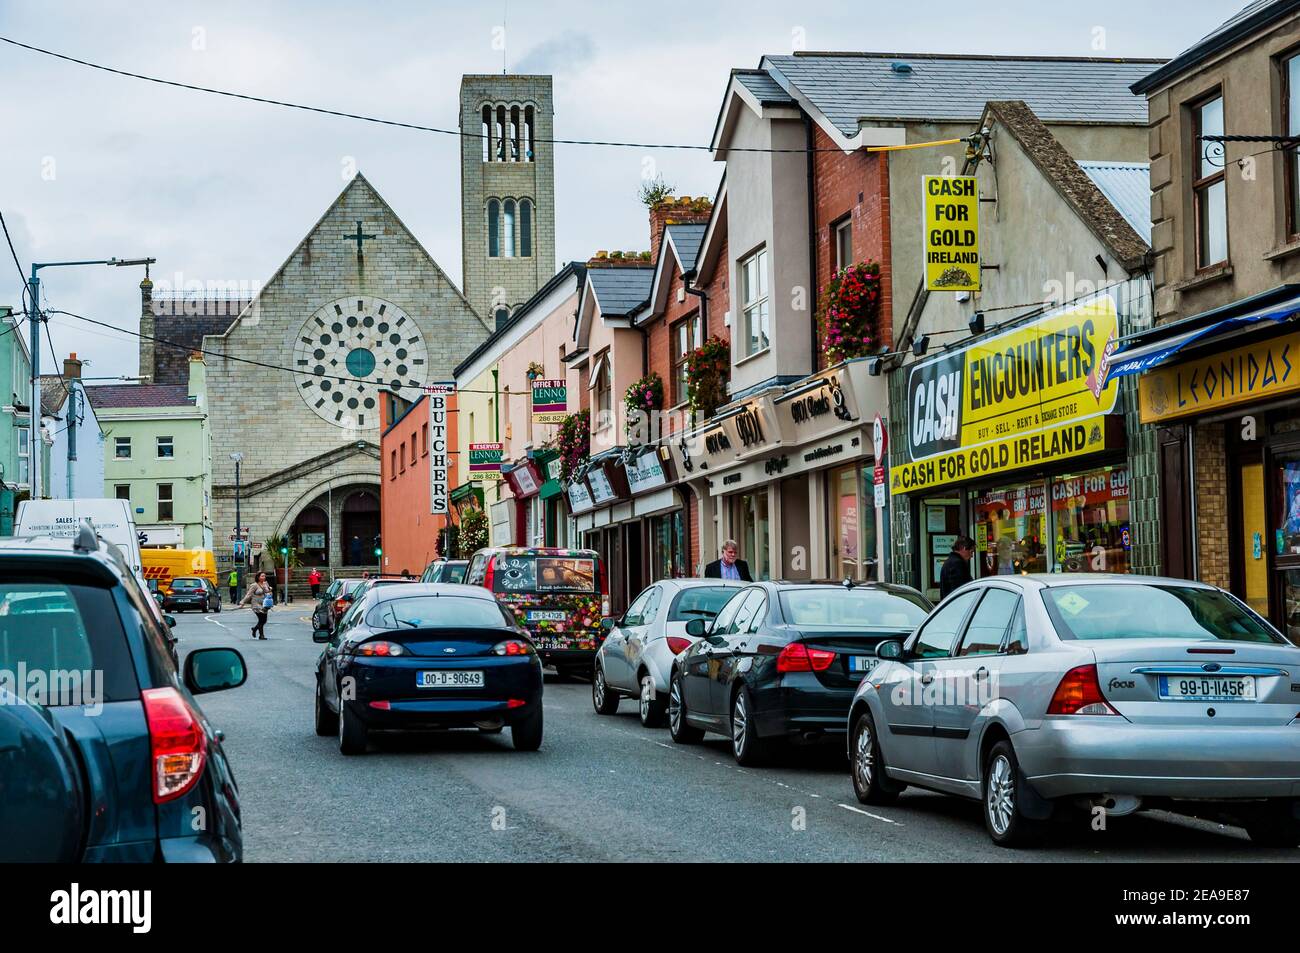 Bray street - Bré, on a cloudy day. Bray, County Wicklow, Leinster, Ireland, Europe Stock Photo